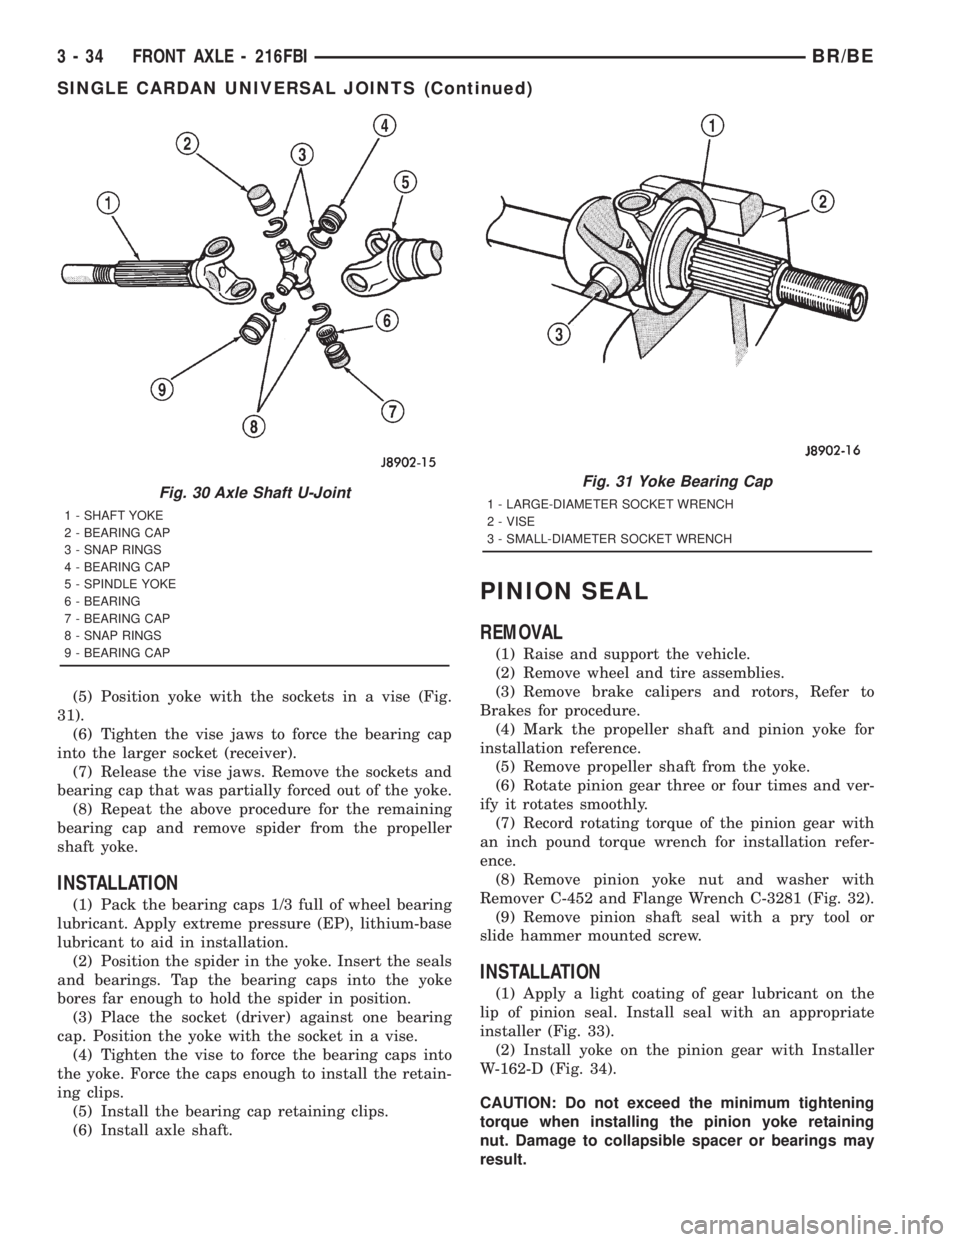 DODGE RAM 2001  Service Repair Manual (5) Position yoke with the sockets in a vise (Fig.
31).
(6) Tighten the vise jaws to force the bearing cap
into the larger socket (receiver).
(7) Release the vise jaws. Remove the sockets and
bearing 